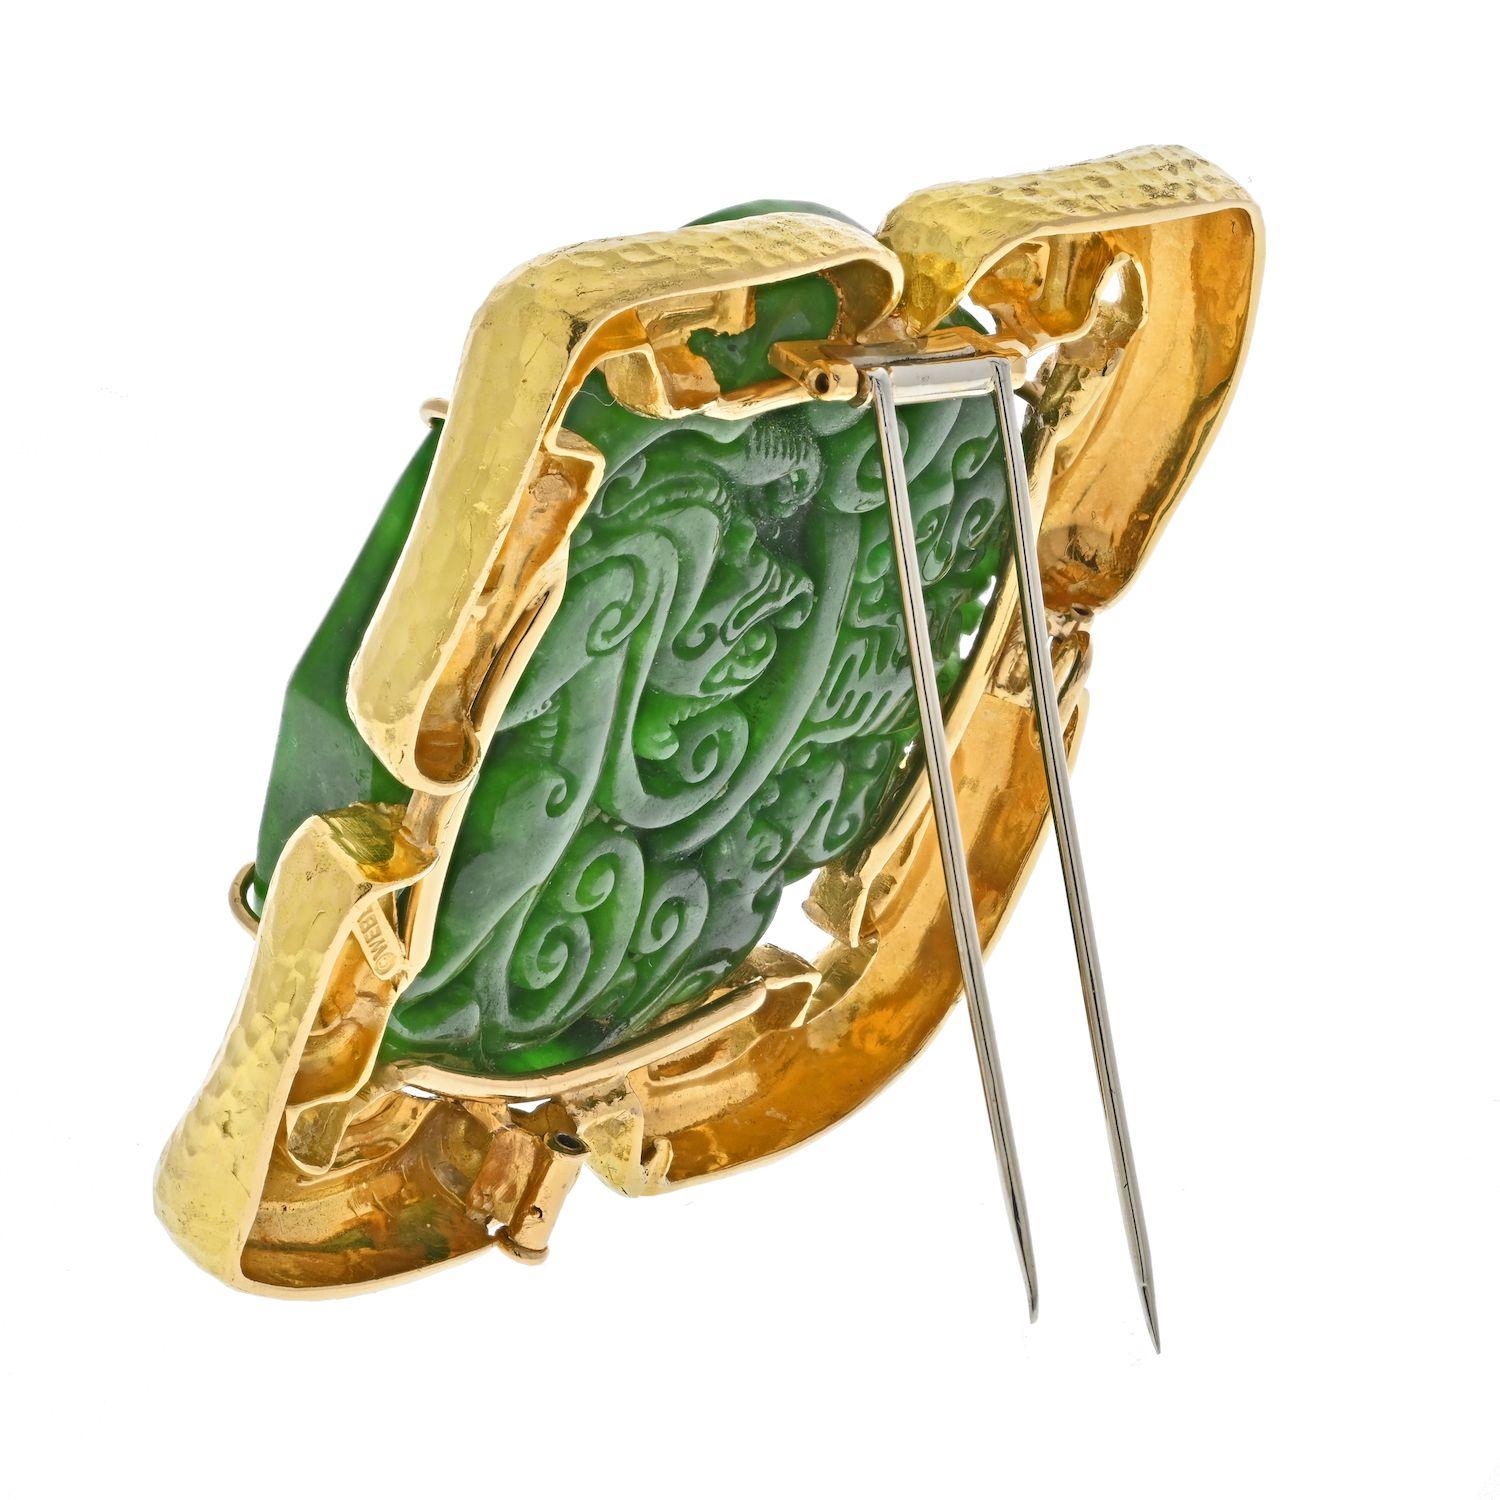 David Webb 18K Yellow Gold Carved Round Jade Pendant And A Brooch.
This substantial brooch is something special and rare, mounted with a round carved Jade this brooch by David Webb will make a visual statement whereever you are. Wear it as a brooch